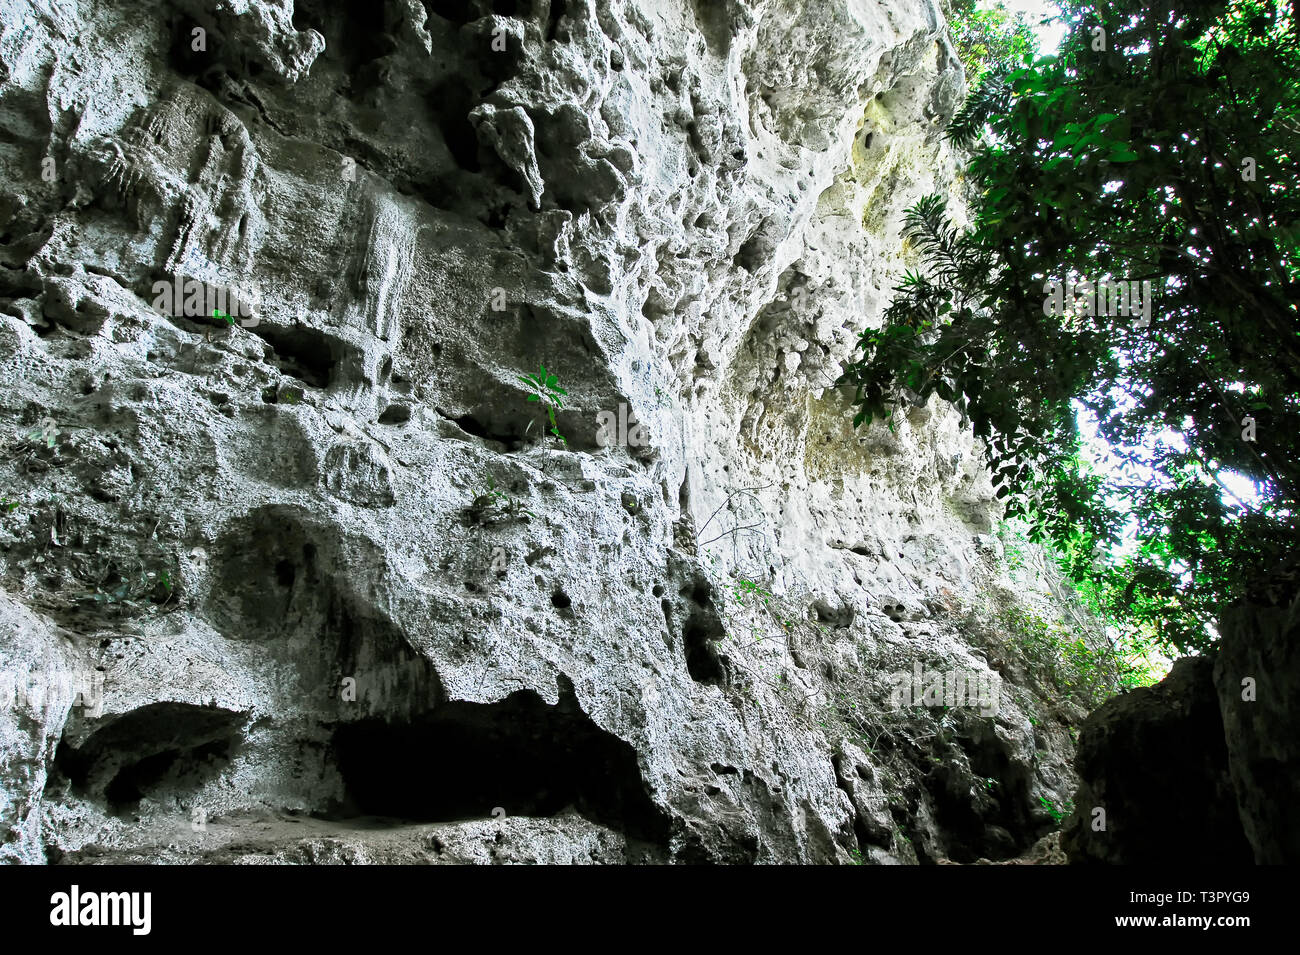 Penablanca, Cagayan Province, Philippines - May 19, 2008: Near the entrance to the limestone Callao Cave with a church built in the first chamber Stock Photo